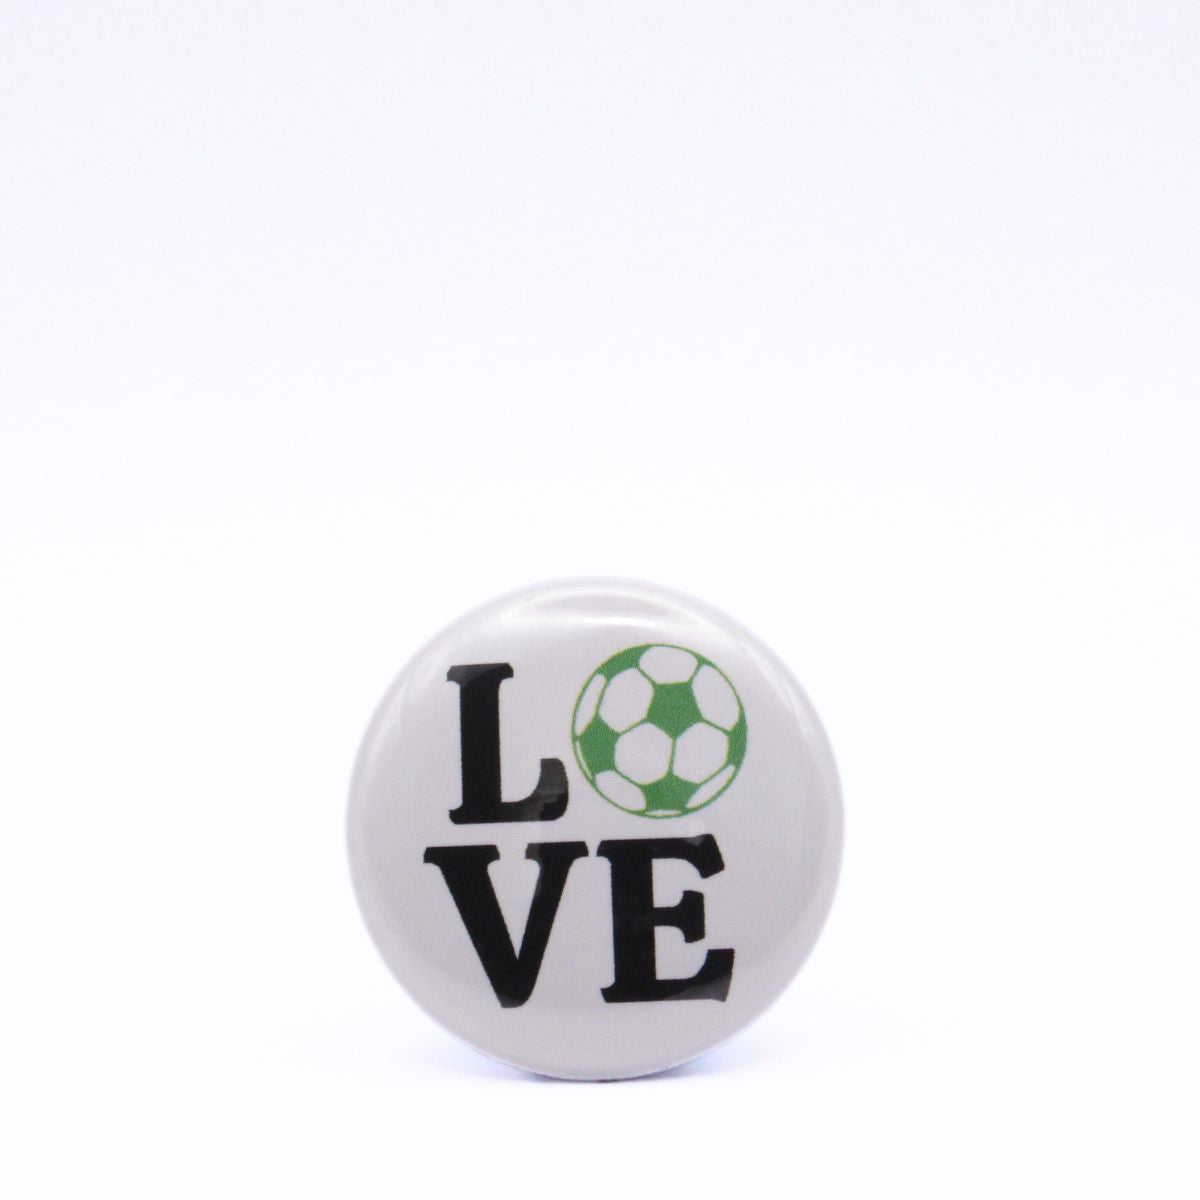 BooBooRoo Pinback Button (i.e. button, badge, pin) displaying the word "Love" with the "O" replaced by a soccer ball. Green soccer ball with black text.